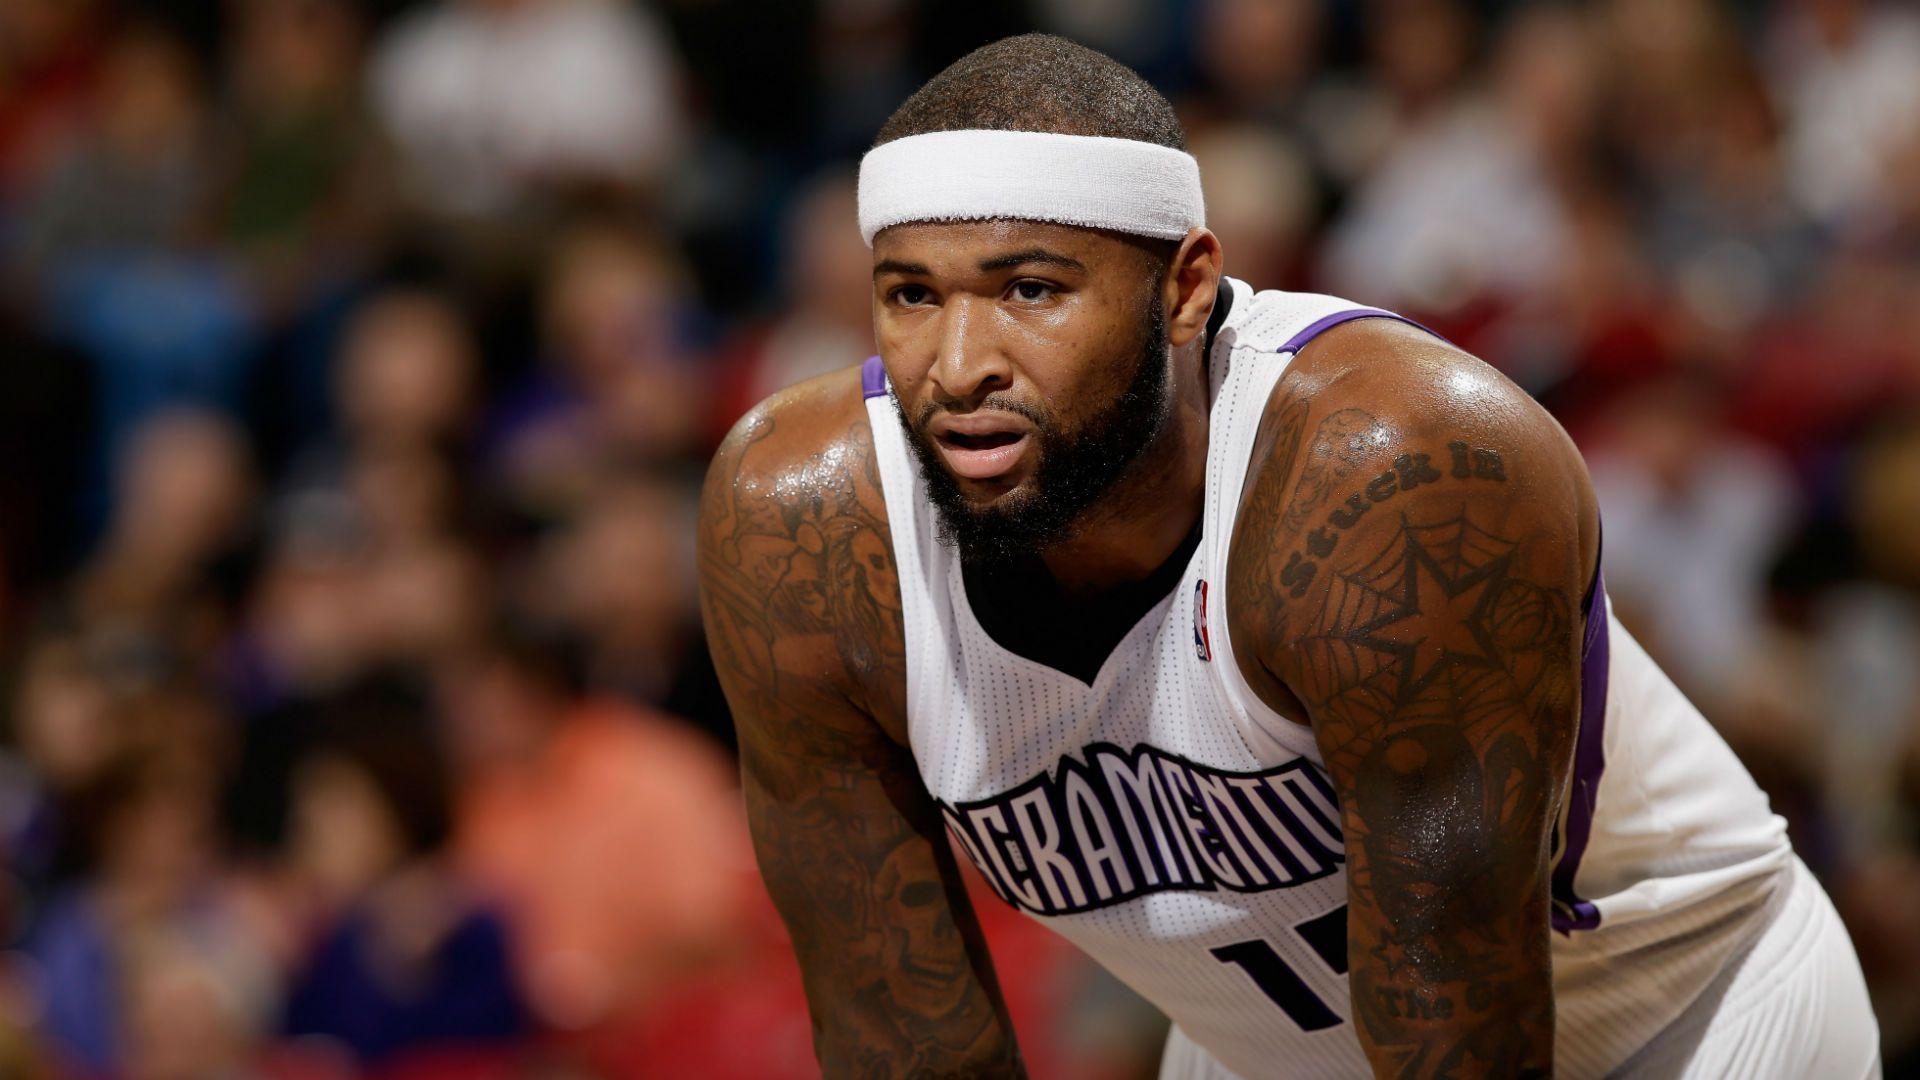 NBA Trades: DeMarcus Cousins Deal With Pelicans An All Around